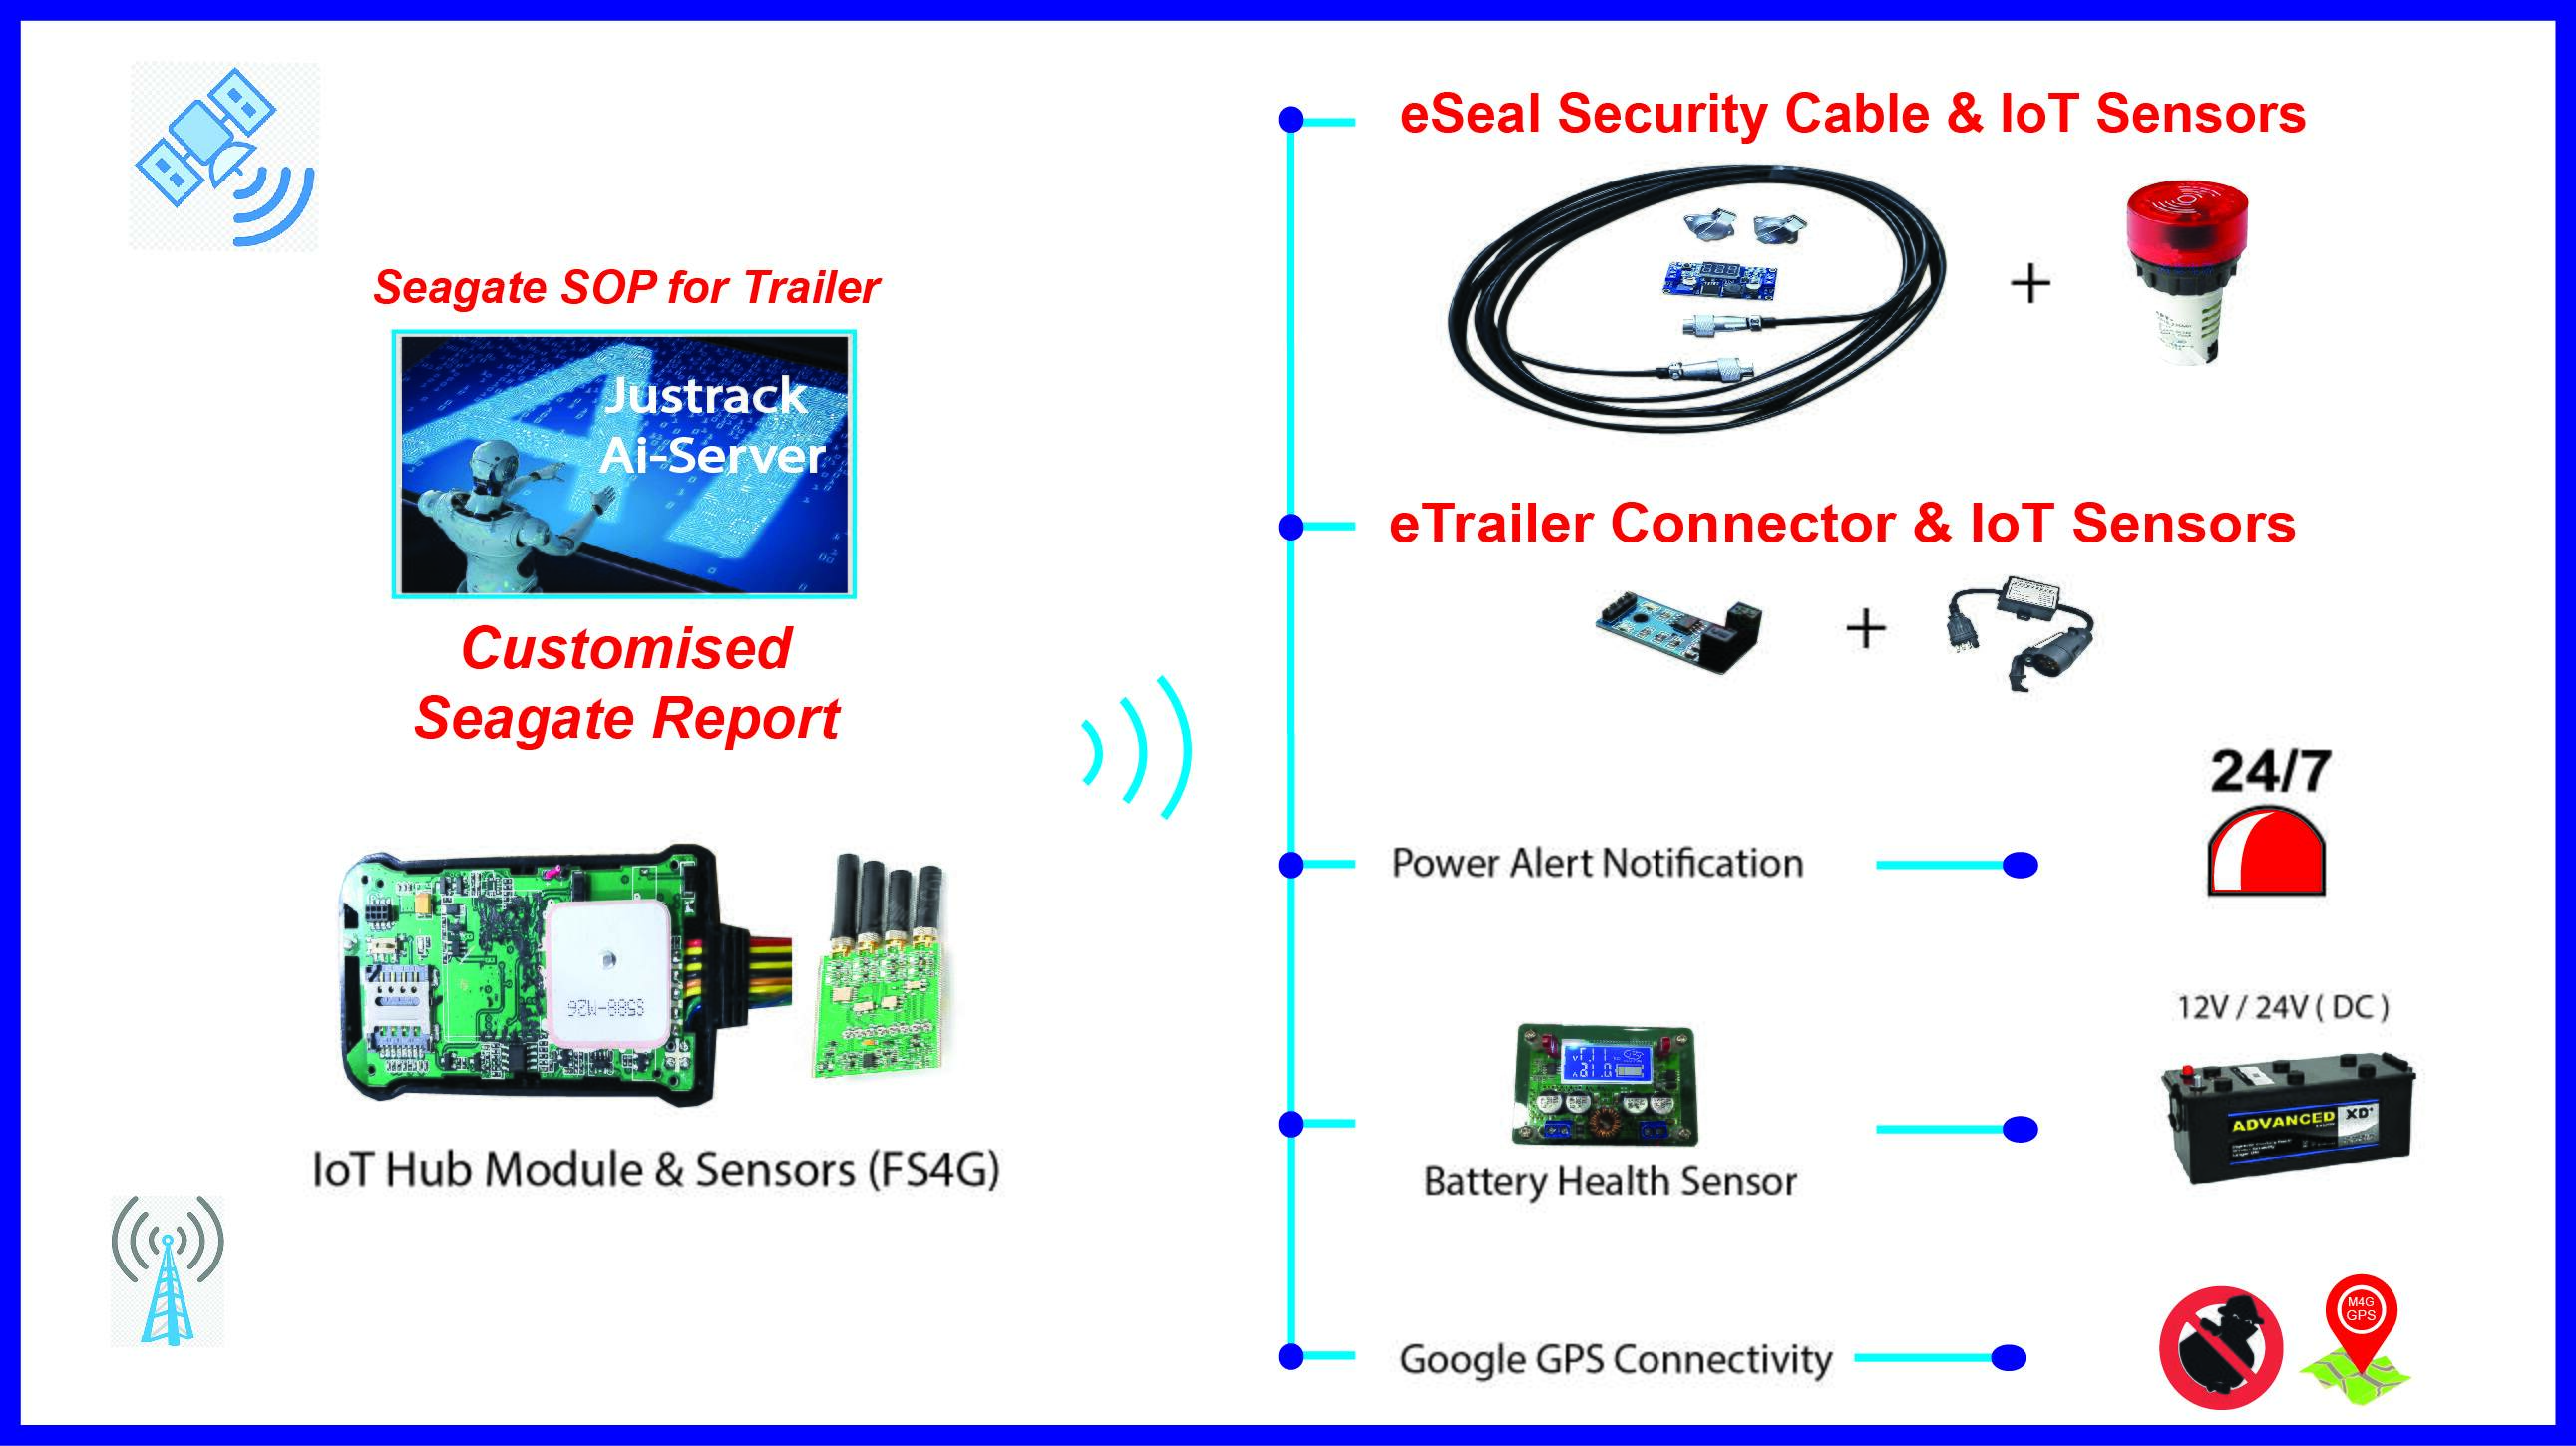 SECURITY TRACKING MANAGEMENT - eSeal (2/4)